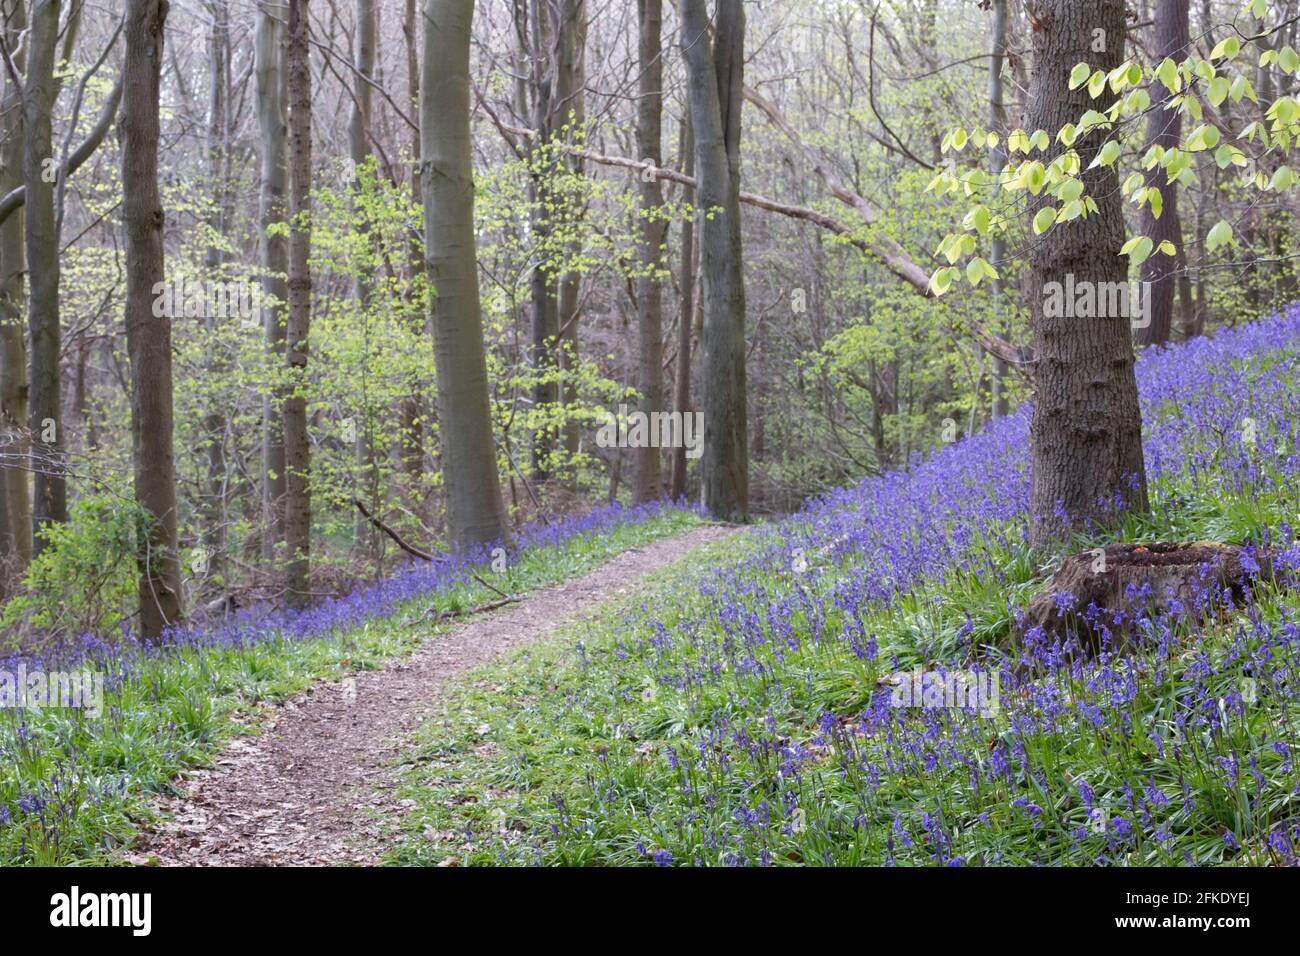 A beech wood full of bright blue bluebell flowers in spring time in Northumberland, North East England Stock Photo